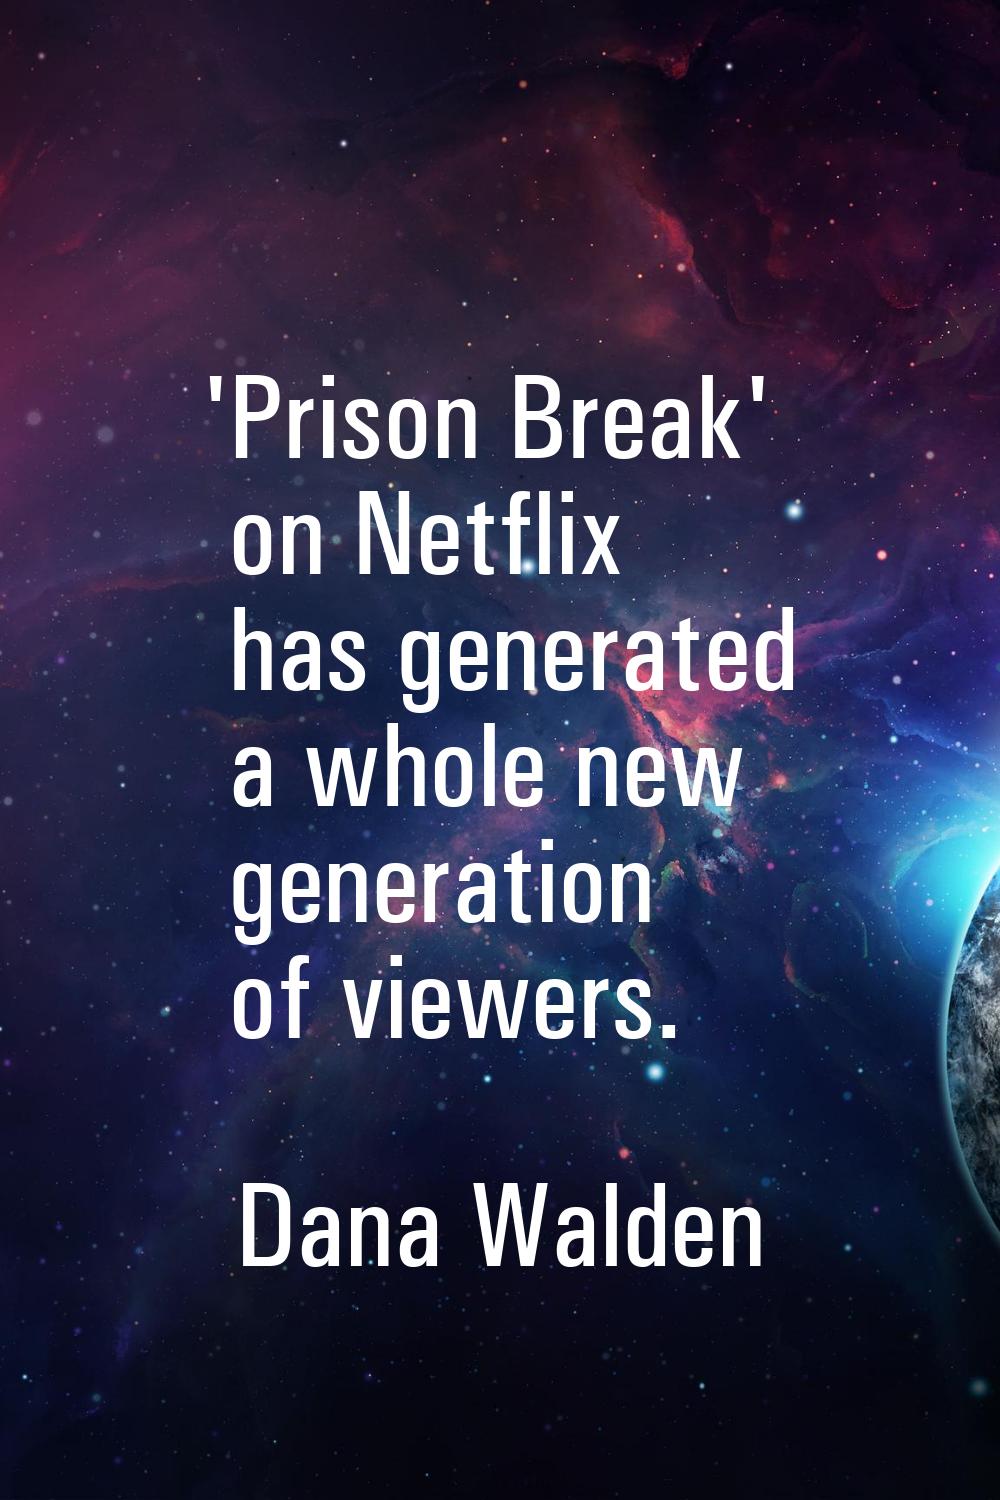 'Prison Break' on Netflix has generated a whole new generation of viewers.